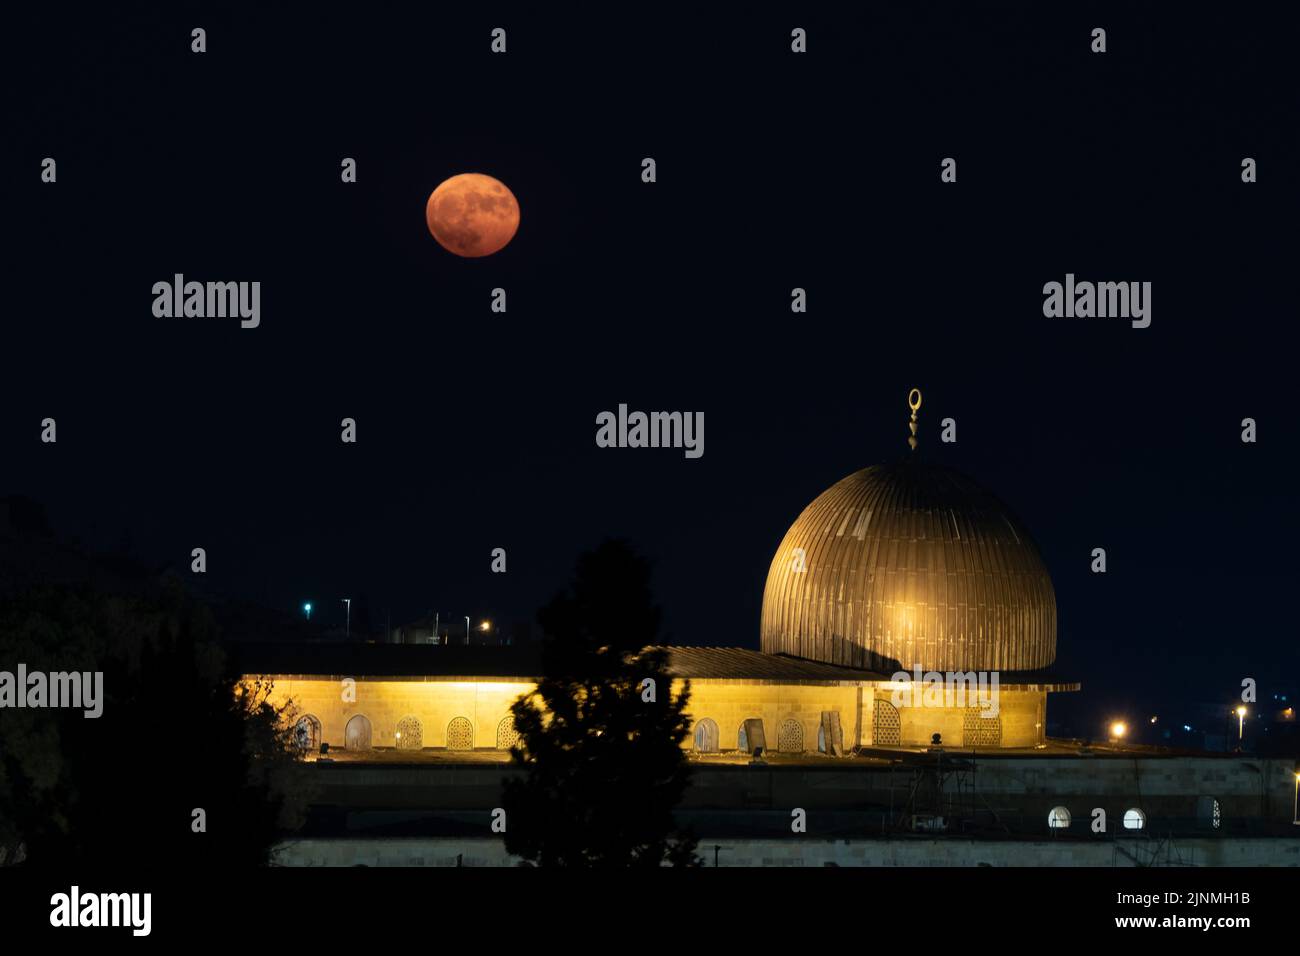 Full moon shines over Al-Aqsa Mosque located on the Temple Mount known to Muslims as the Haram esh-Sharif in the Old City East Jerusalem Israel Stock Photo